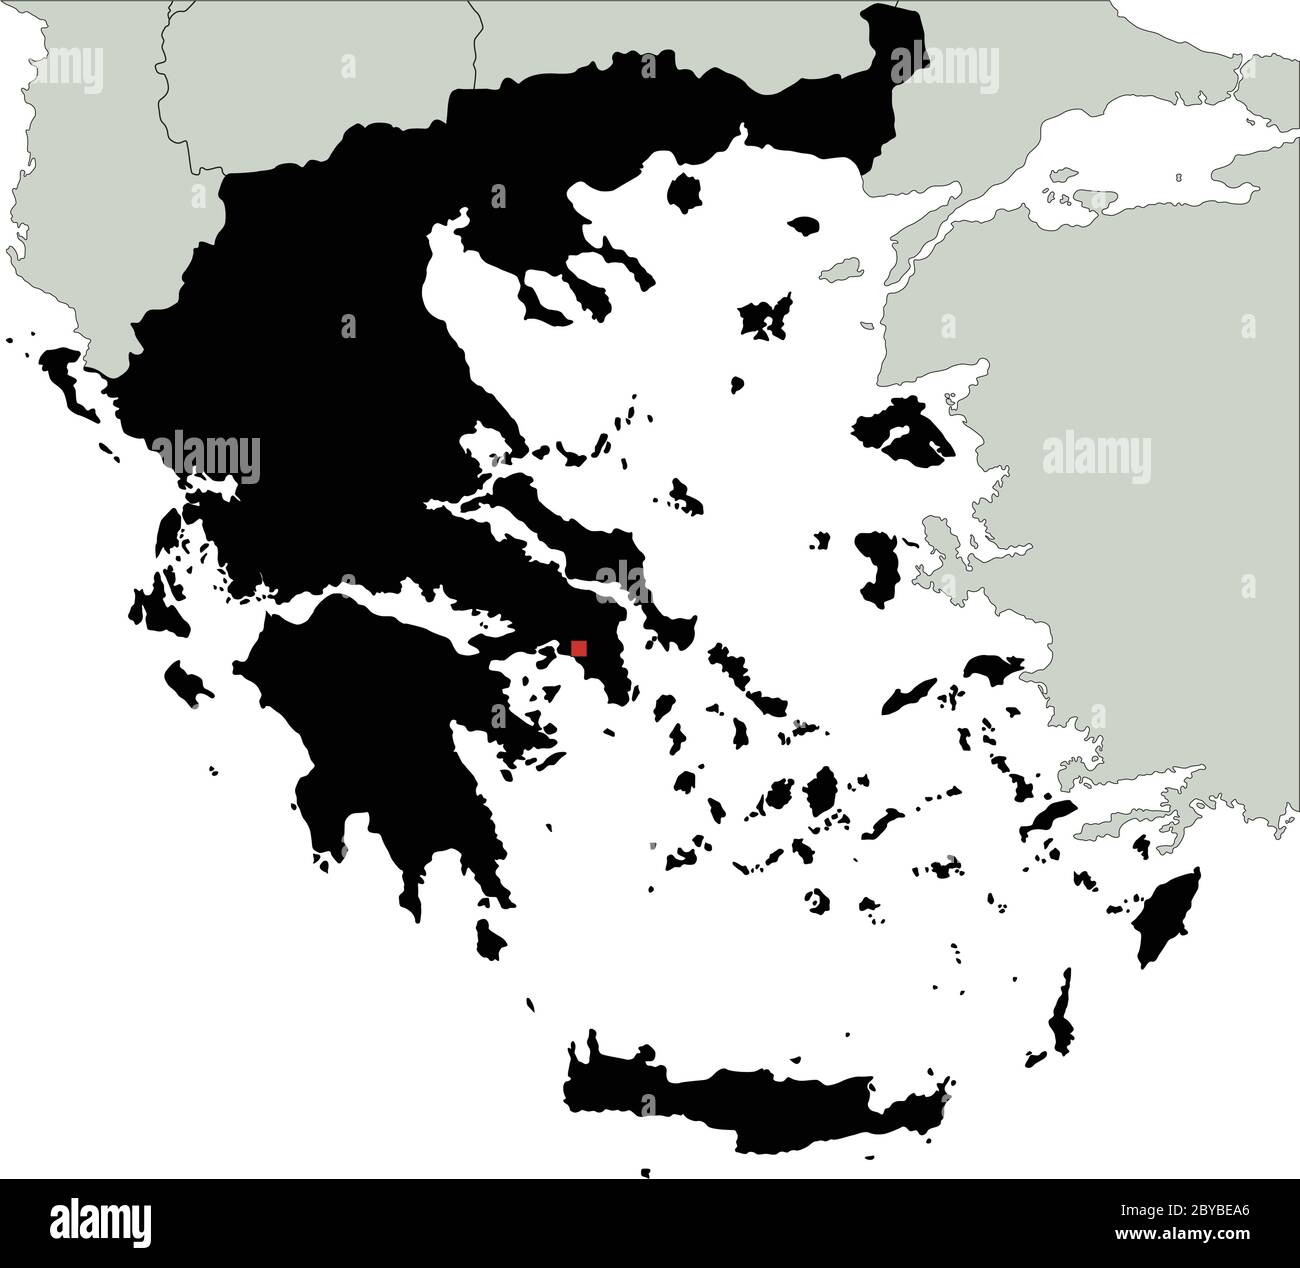 Highly Detailed Greece Silhouette map. Stock Vector